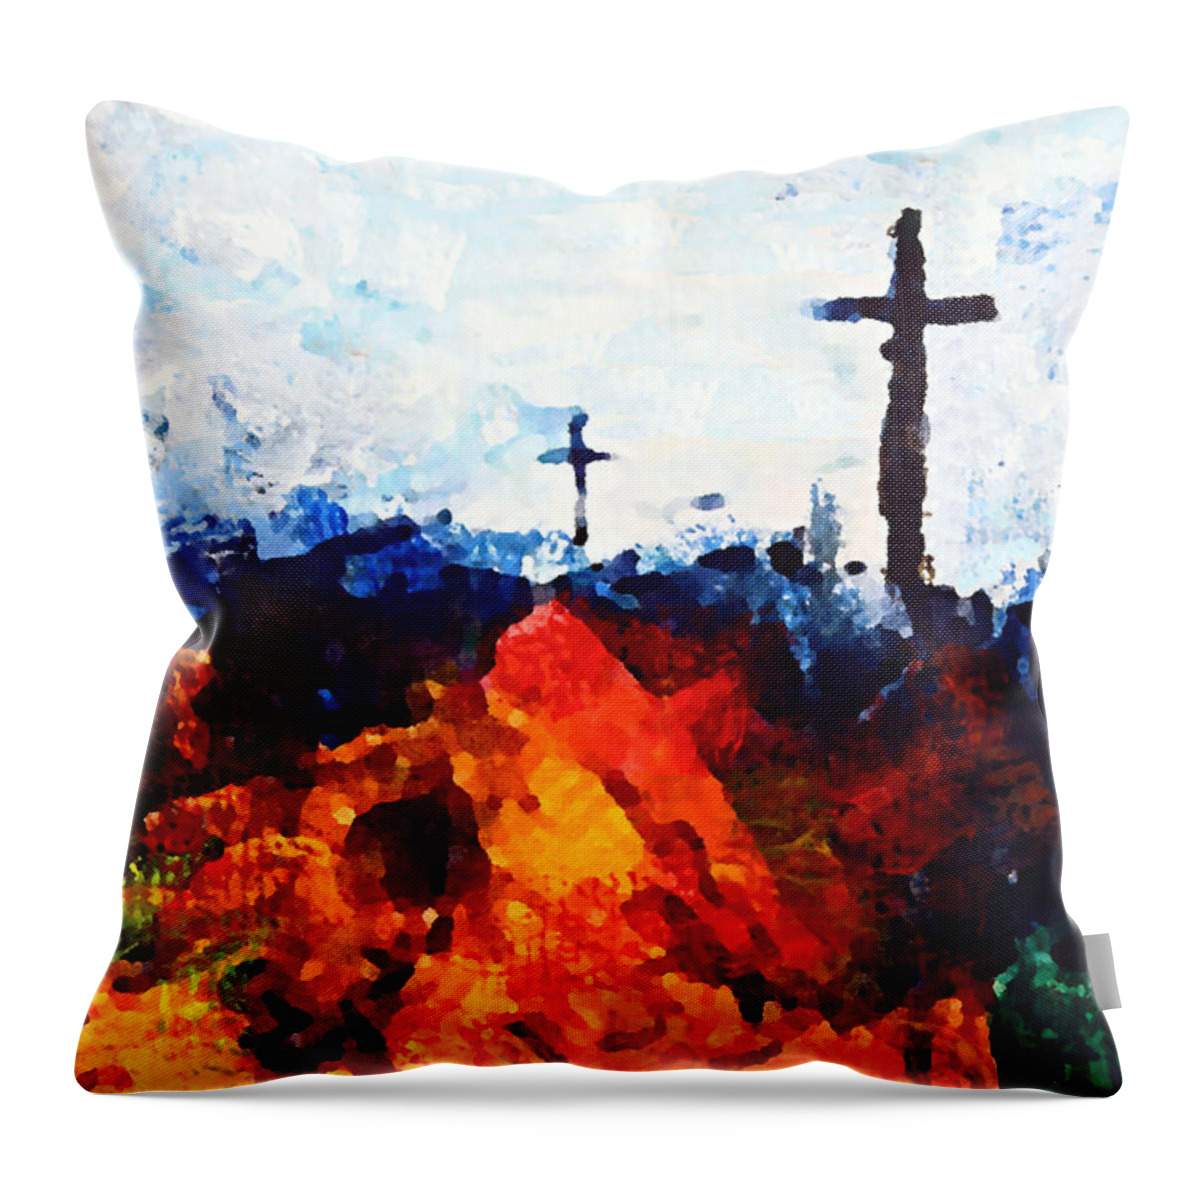 Three Wooden Crosses Throw Pillow featuring the digital art Three Wooden Crosses by Kume Bryant